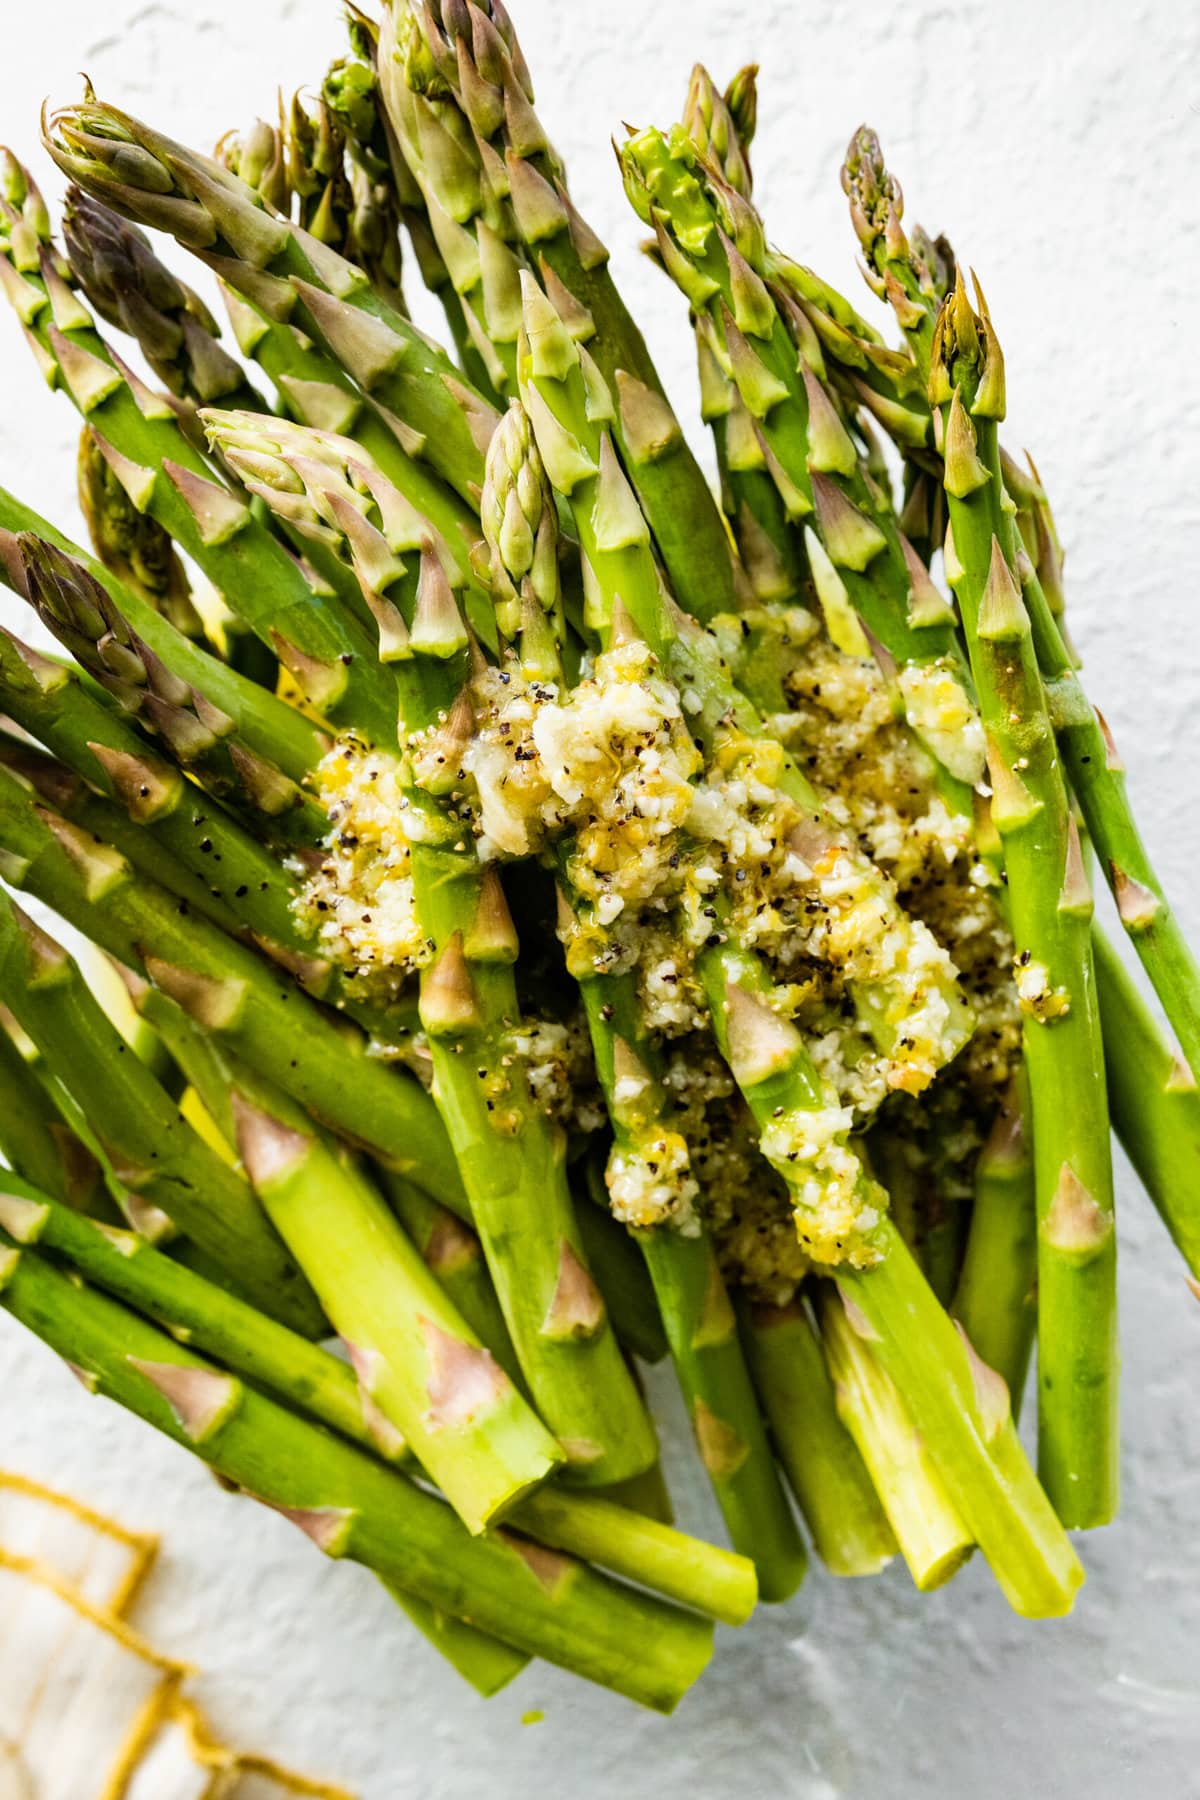 how to make Easy best oven-roasted asparagus recipe (step-by-step instructions)- mix asparagus with the dressing in the bowl. Toss to coat.